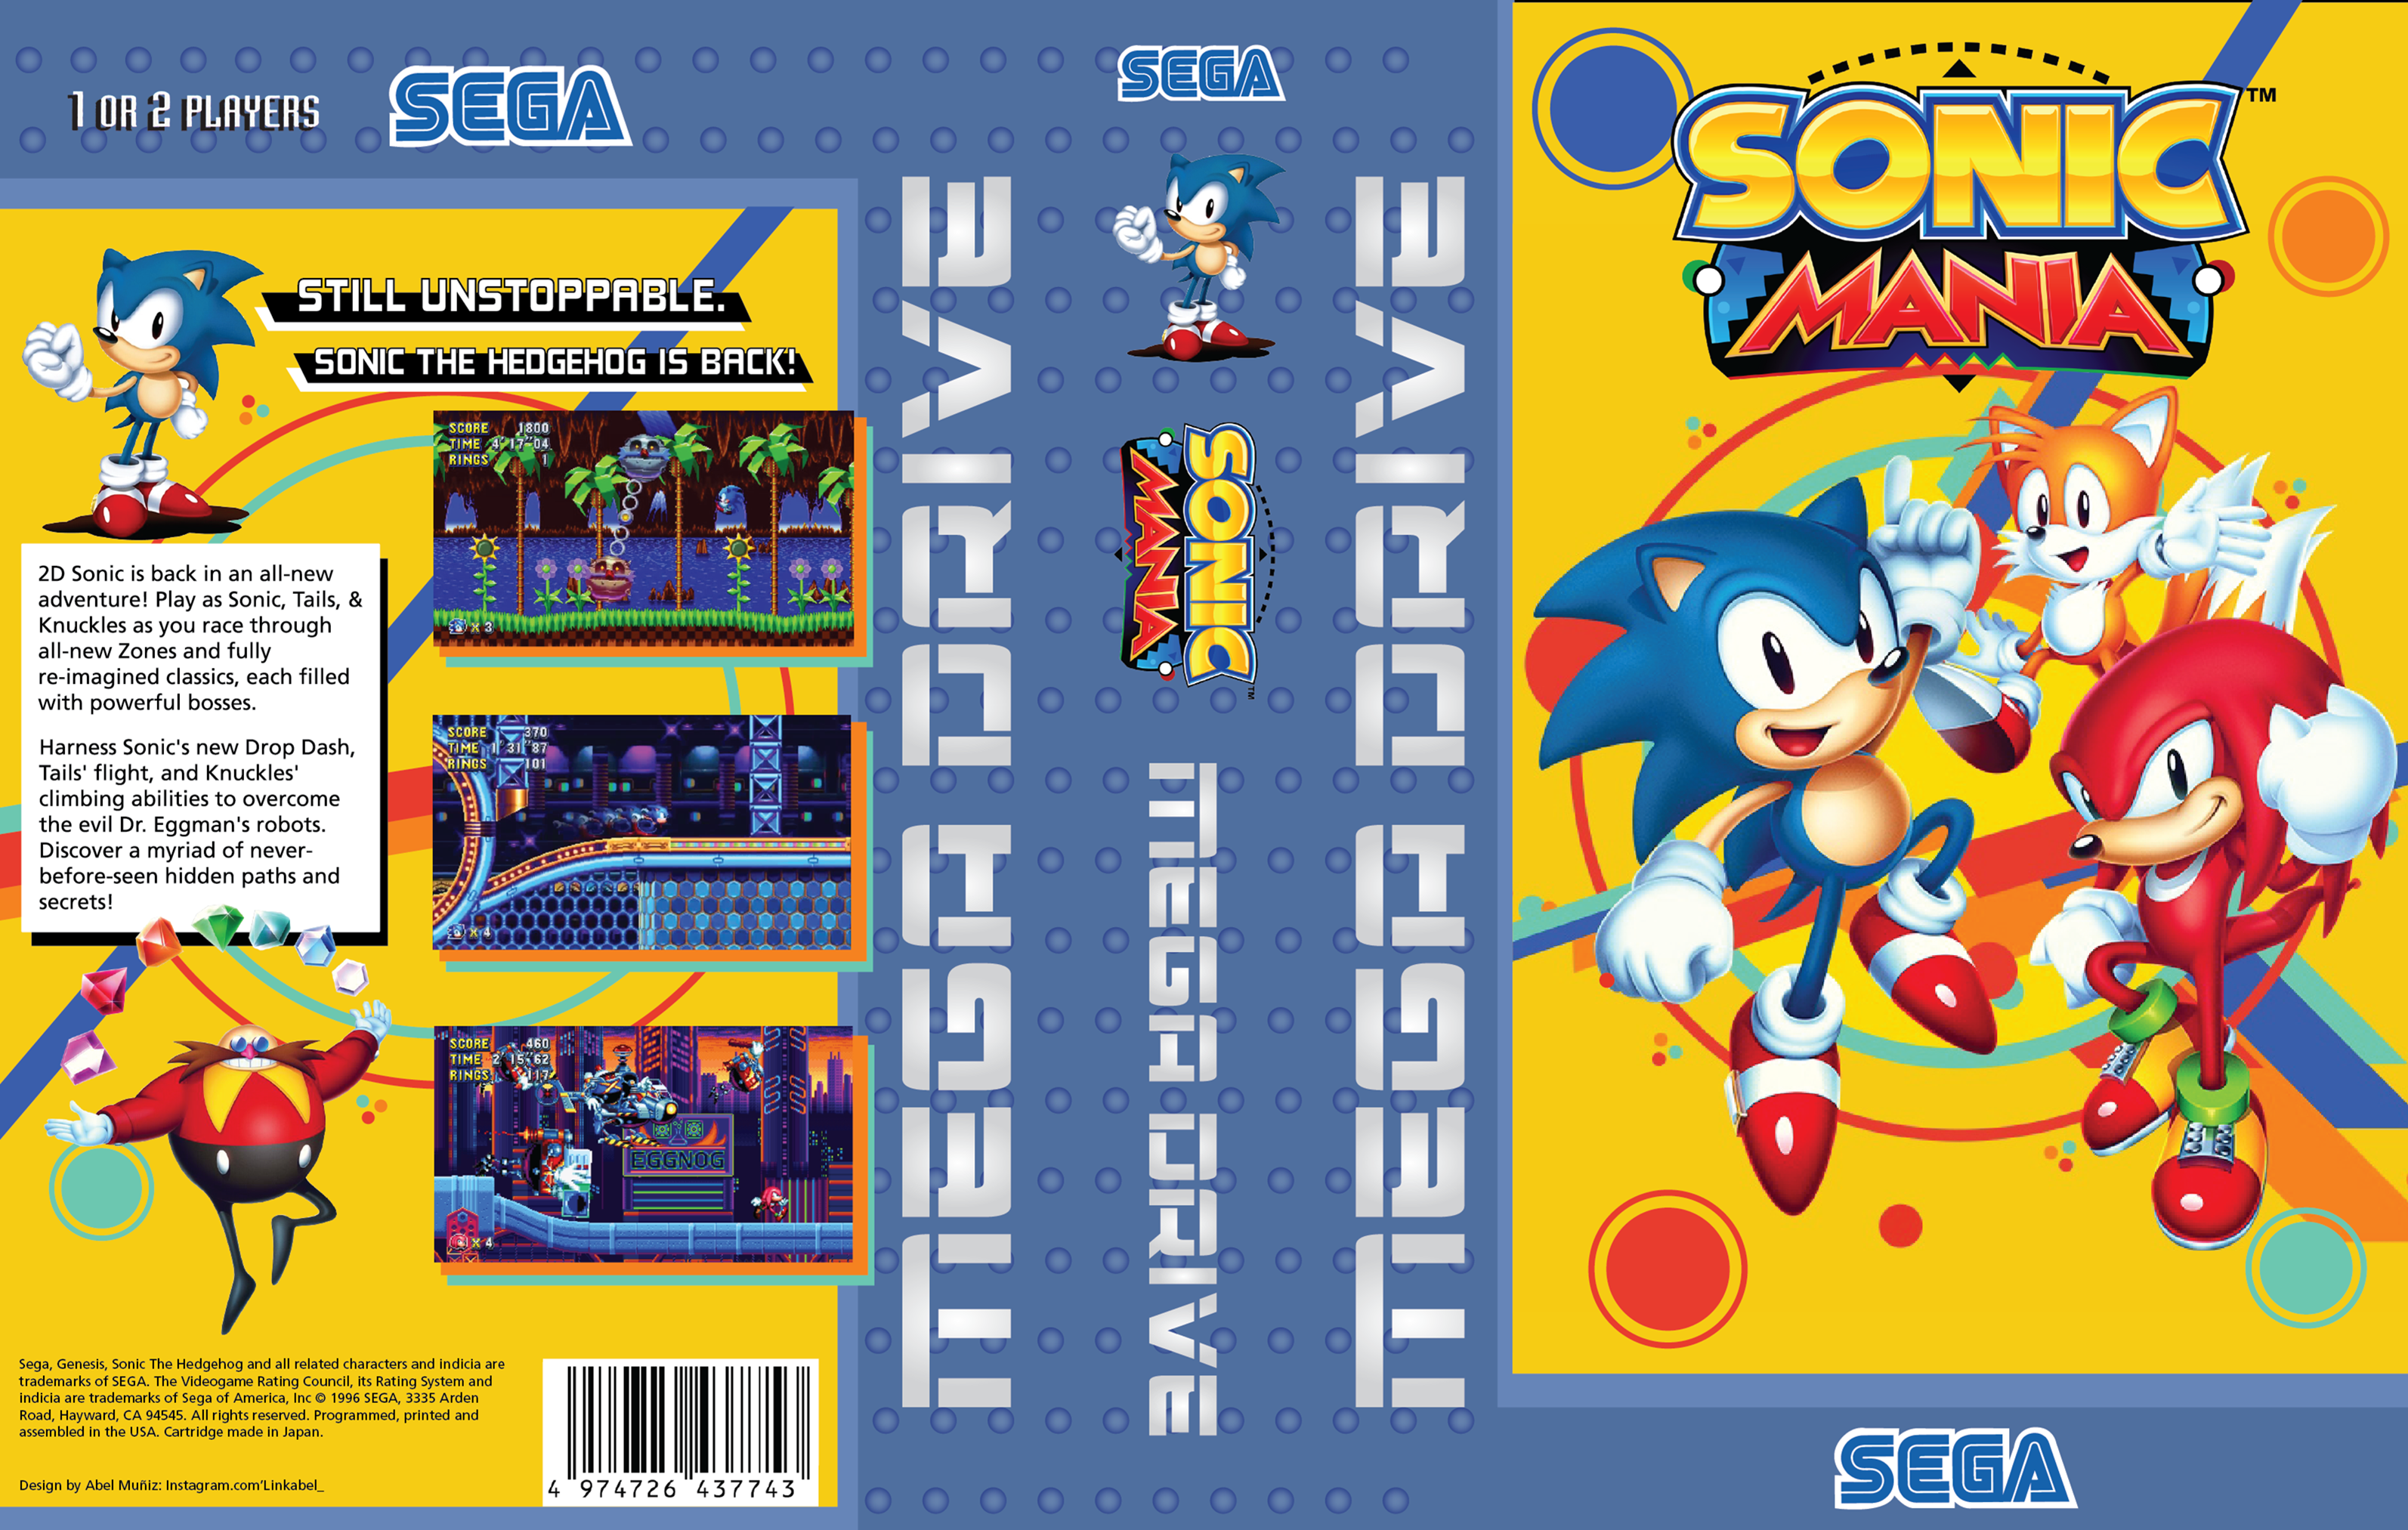  Sonic Mania: Collector's Edition - PlayStation 4